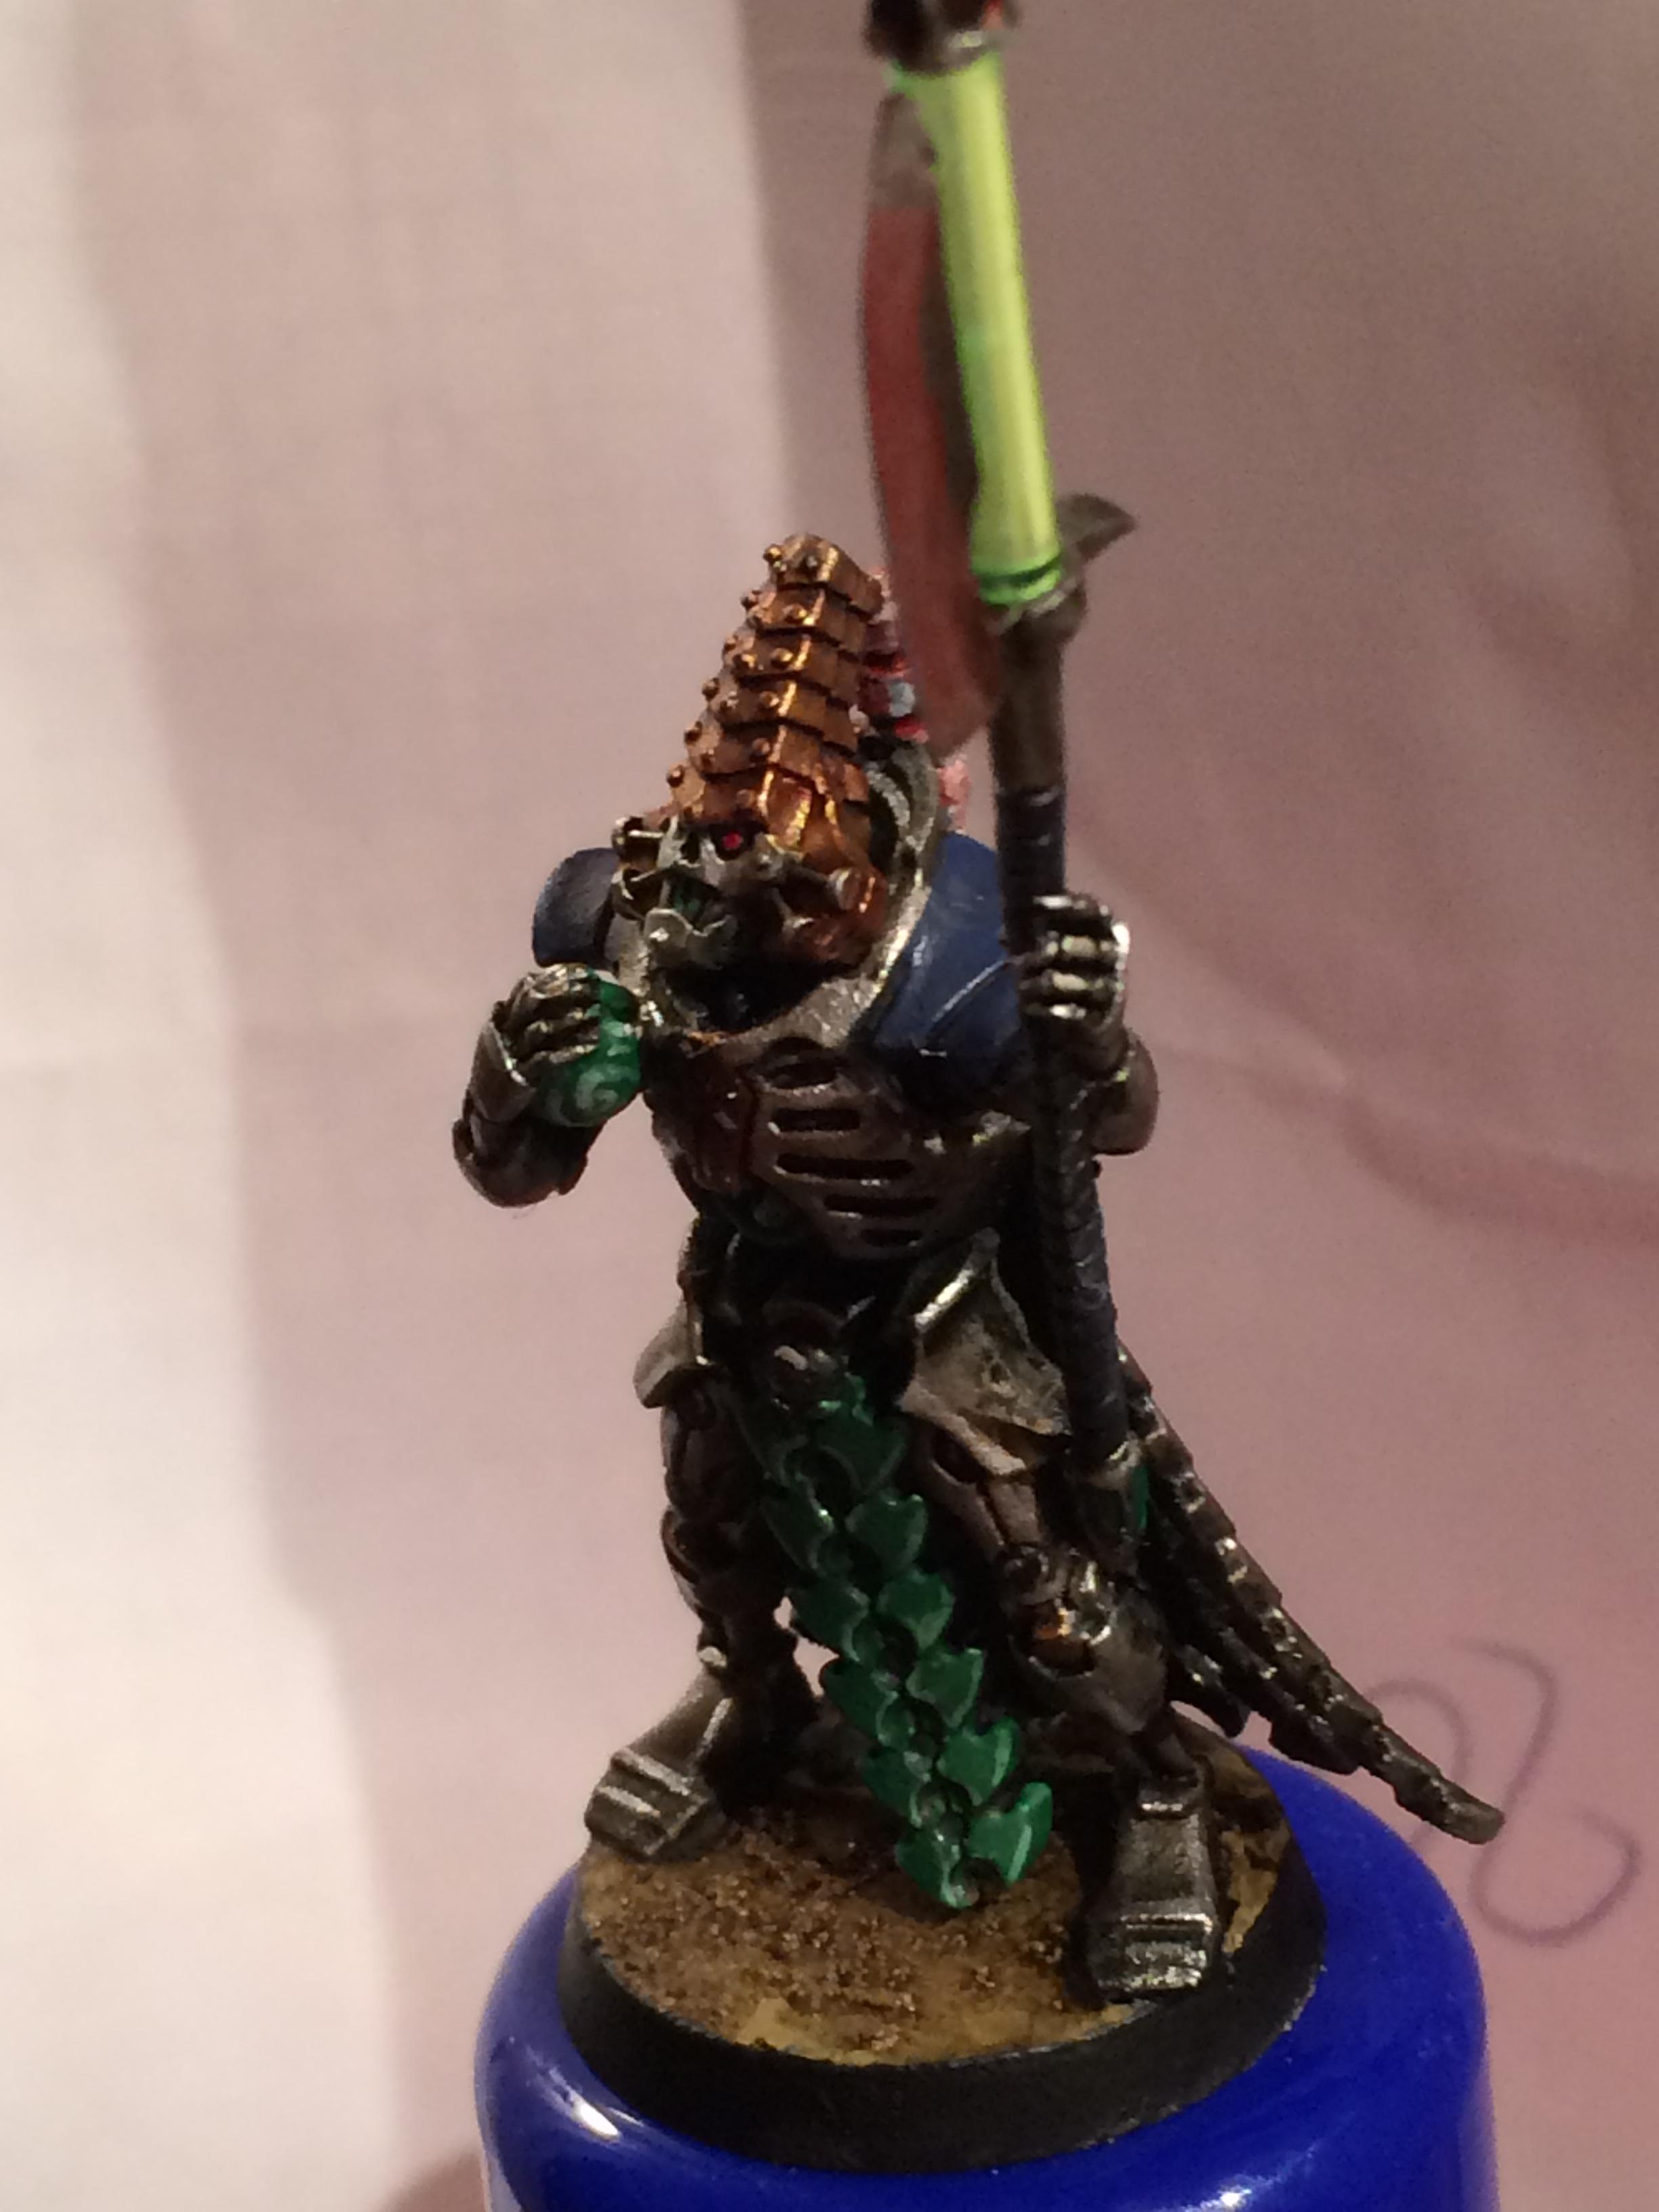 Conversion, Cool, Fast, Gaukler, Little Bit Wip, Lord, Metal, Metallic, Necrons, Old, Oldhammer, Painting, Quest, Rogue, School, Scratch Build, Simple, Skeletons, Star, Starquest, Style, Trader, Undead, Warriors